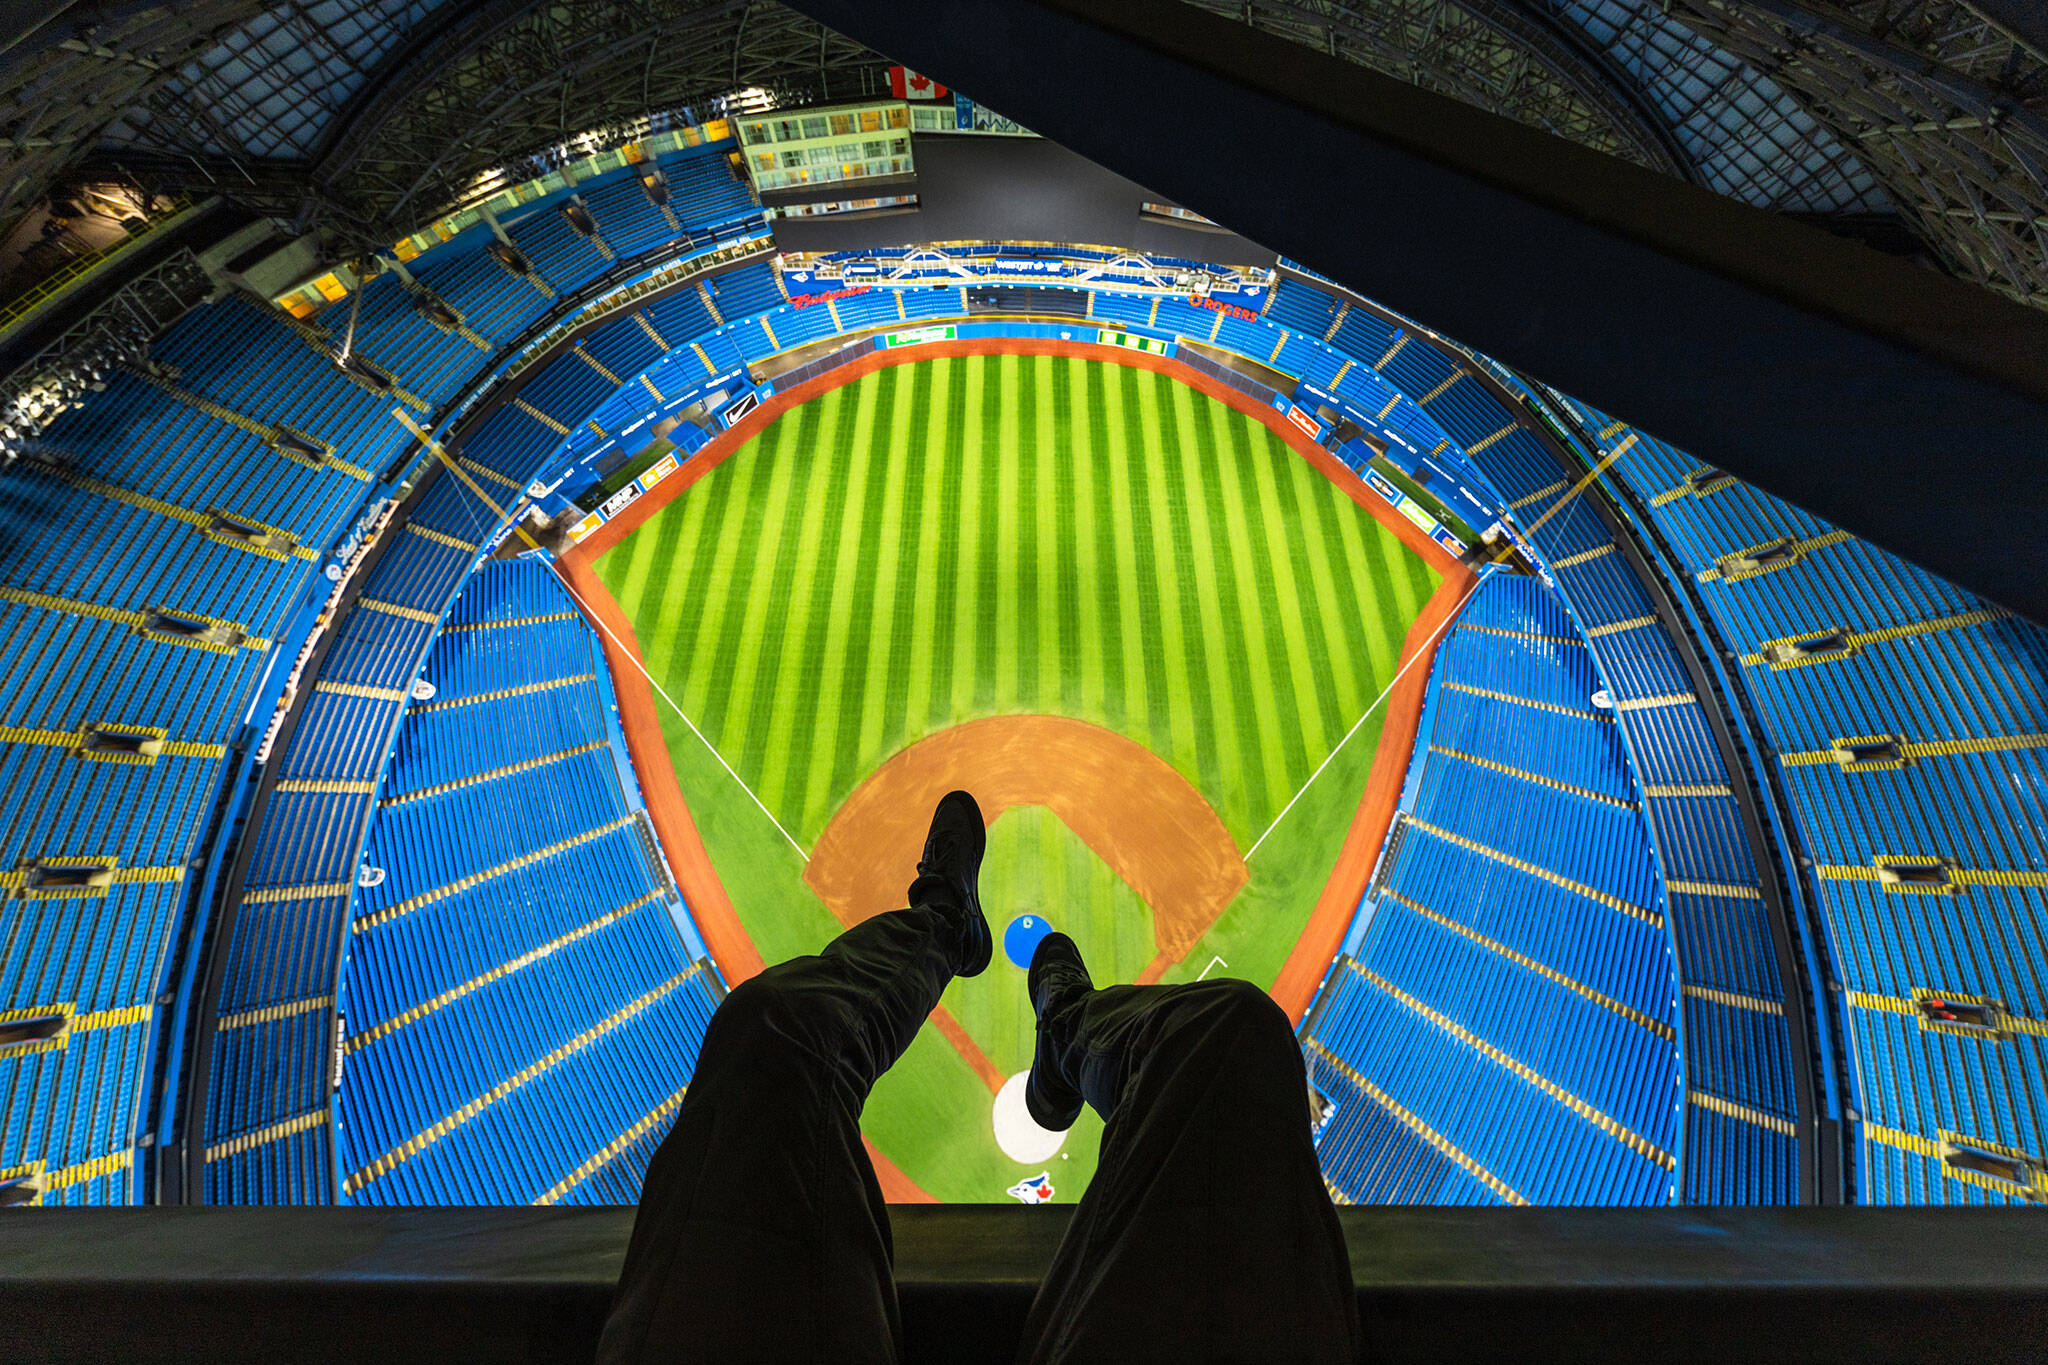 The debut of the SkyDome's retractable roof was like a dispatch